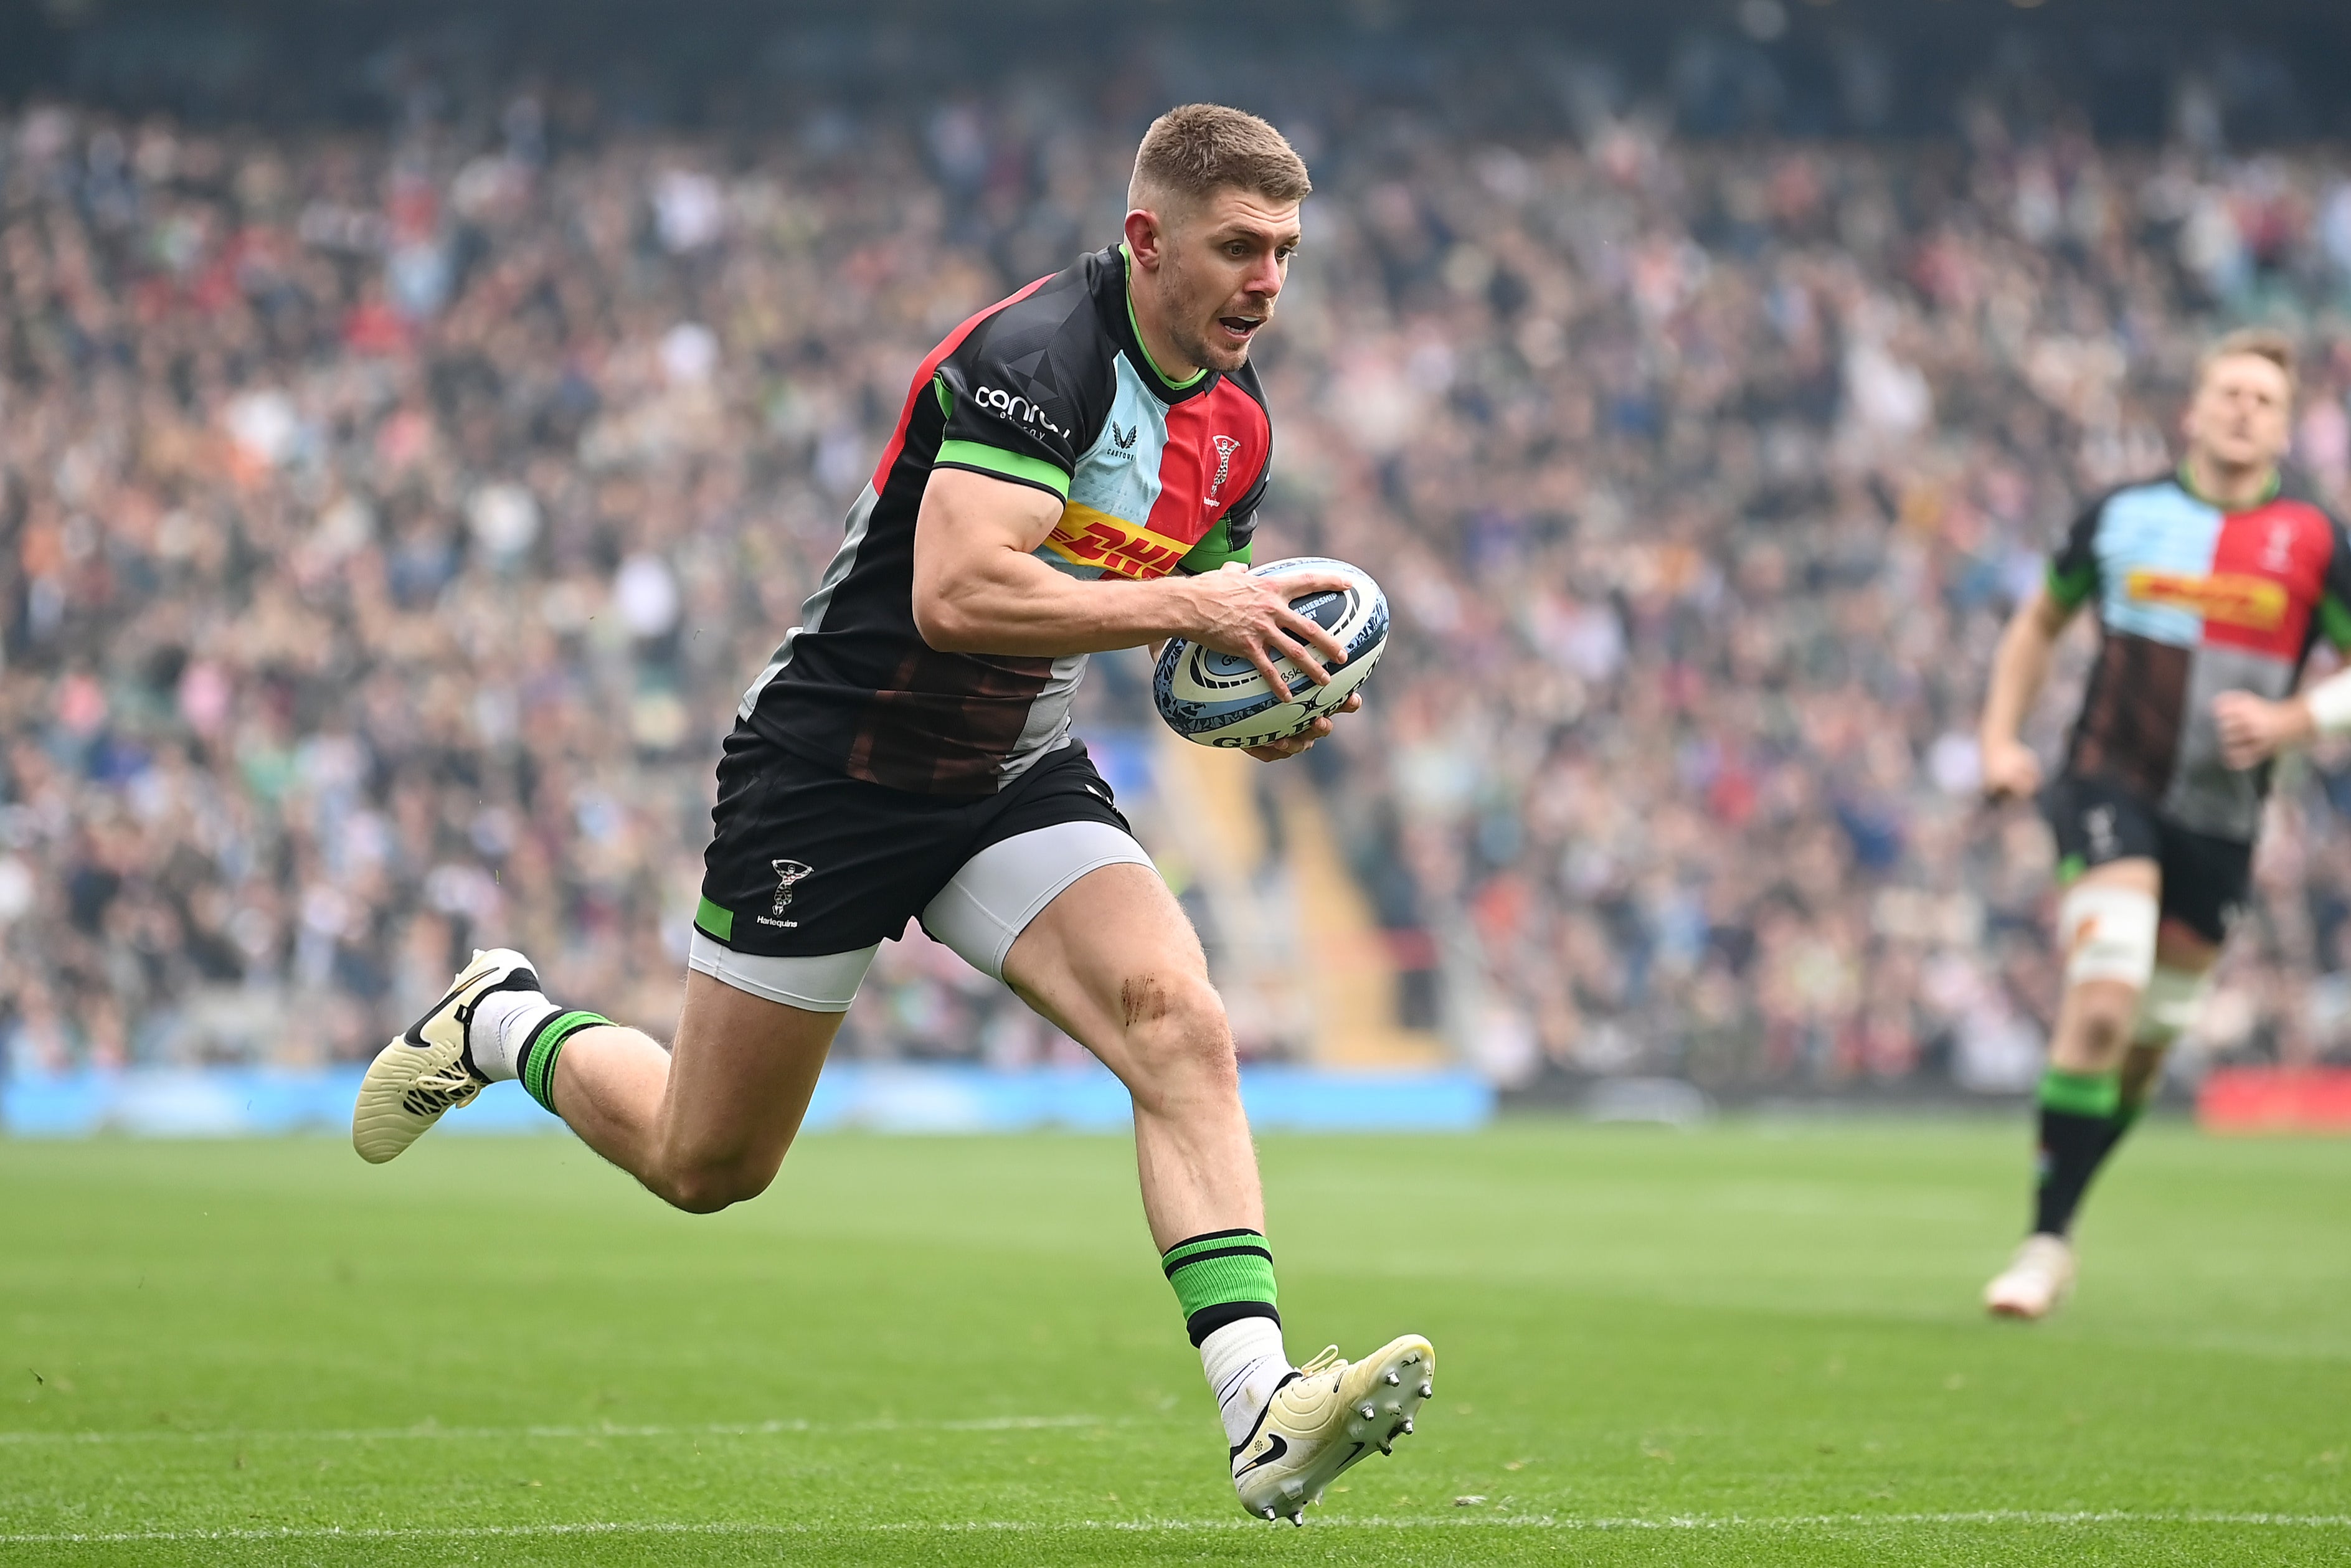 Luke Northmore has been one of Harlequins’ most reliable performers for several seasons